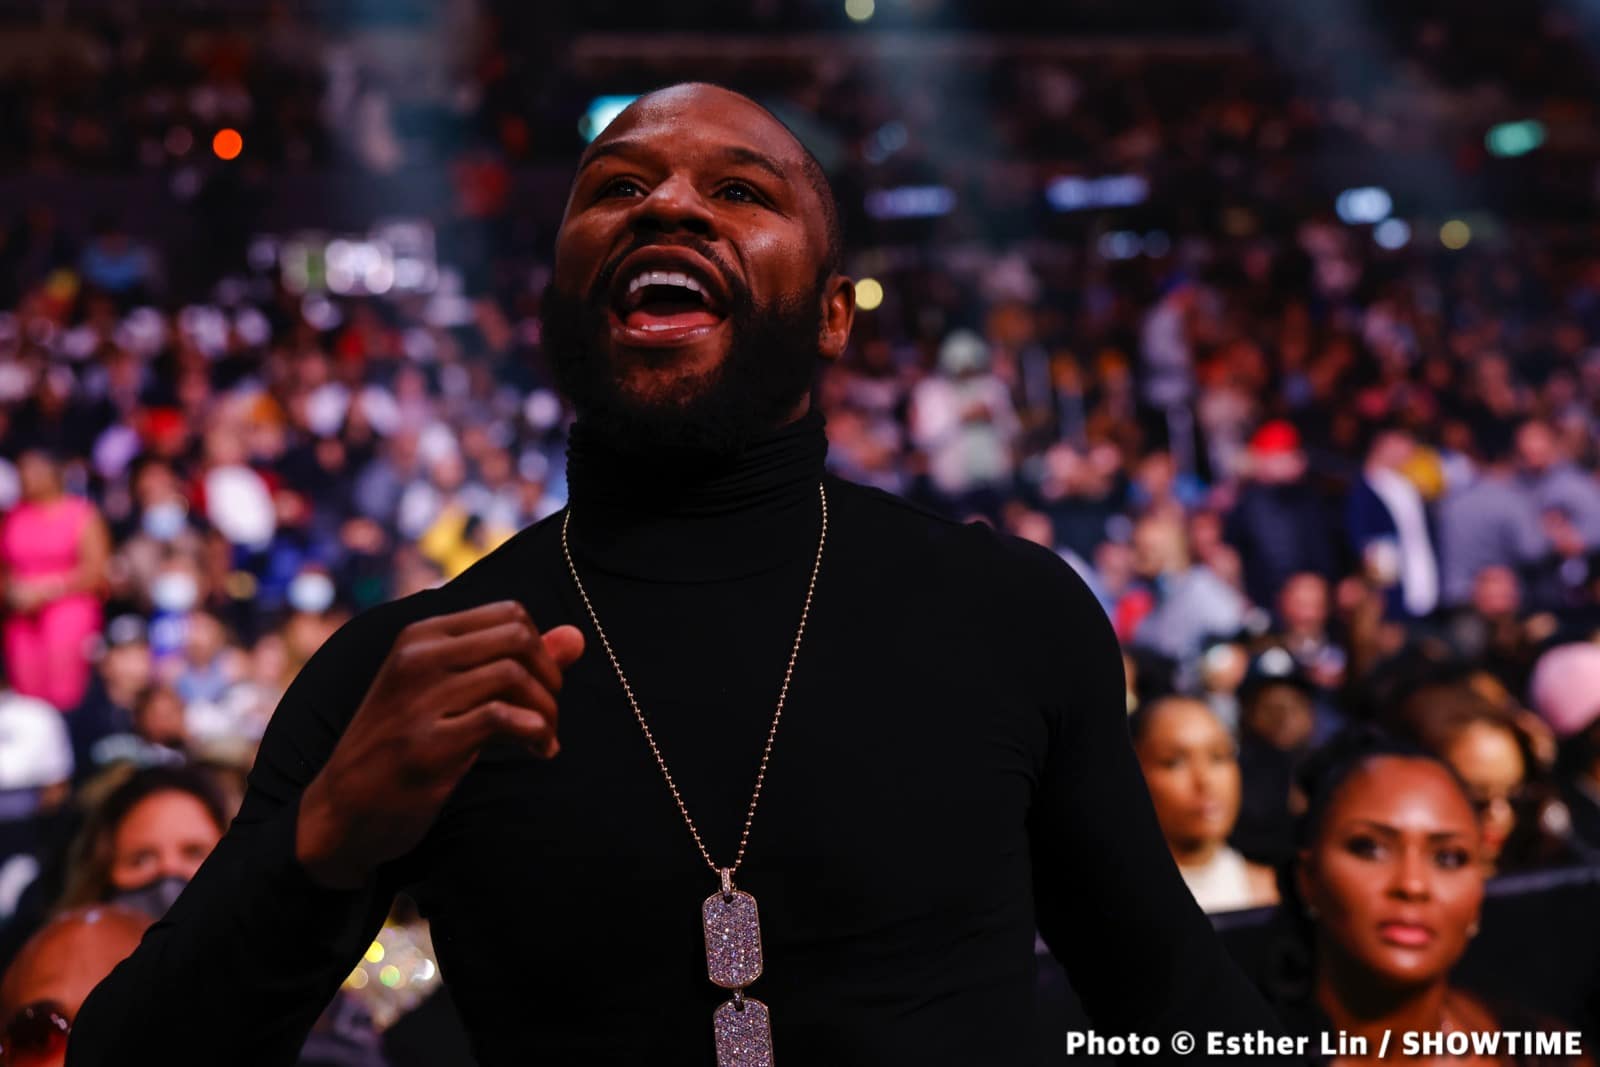 Floyd Mayweather Teases Ring Return, Says He Would Have To Be Paid “At Least $200 Million”